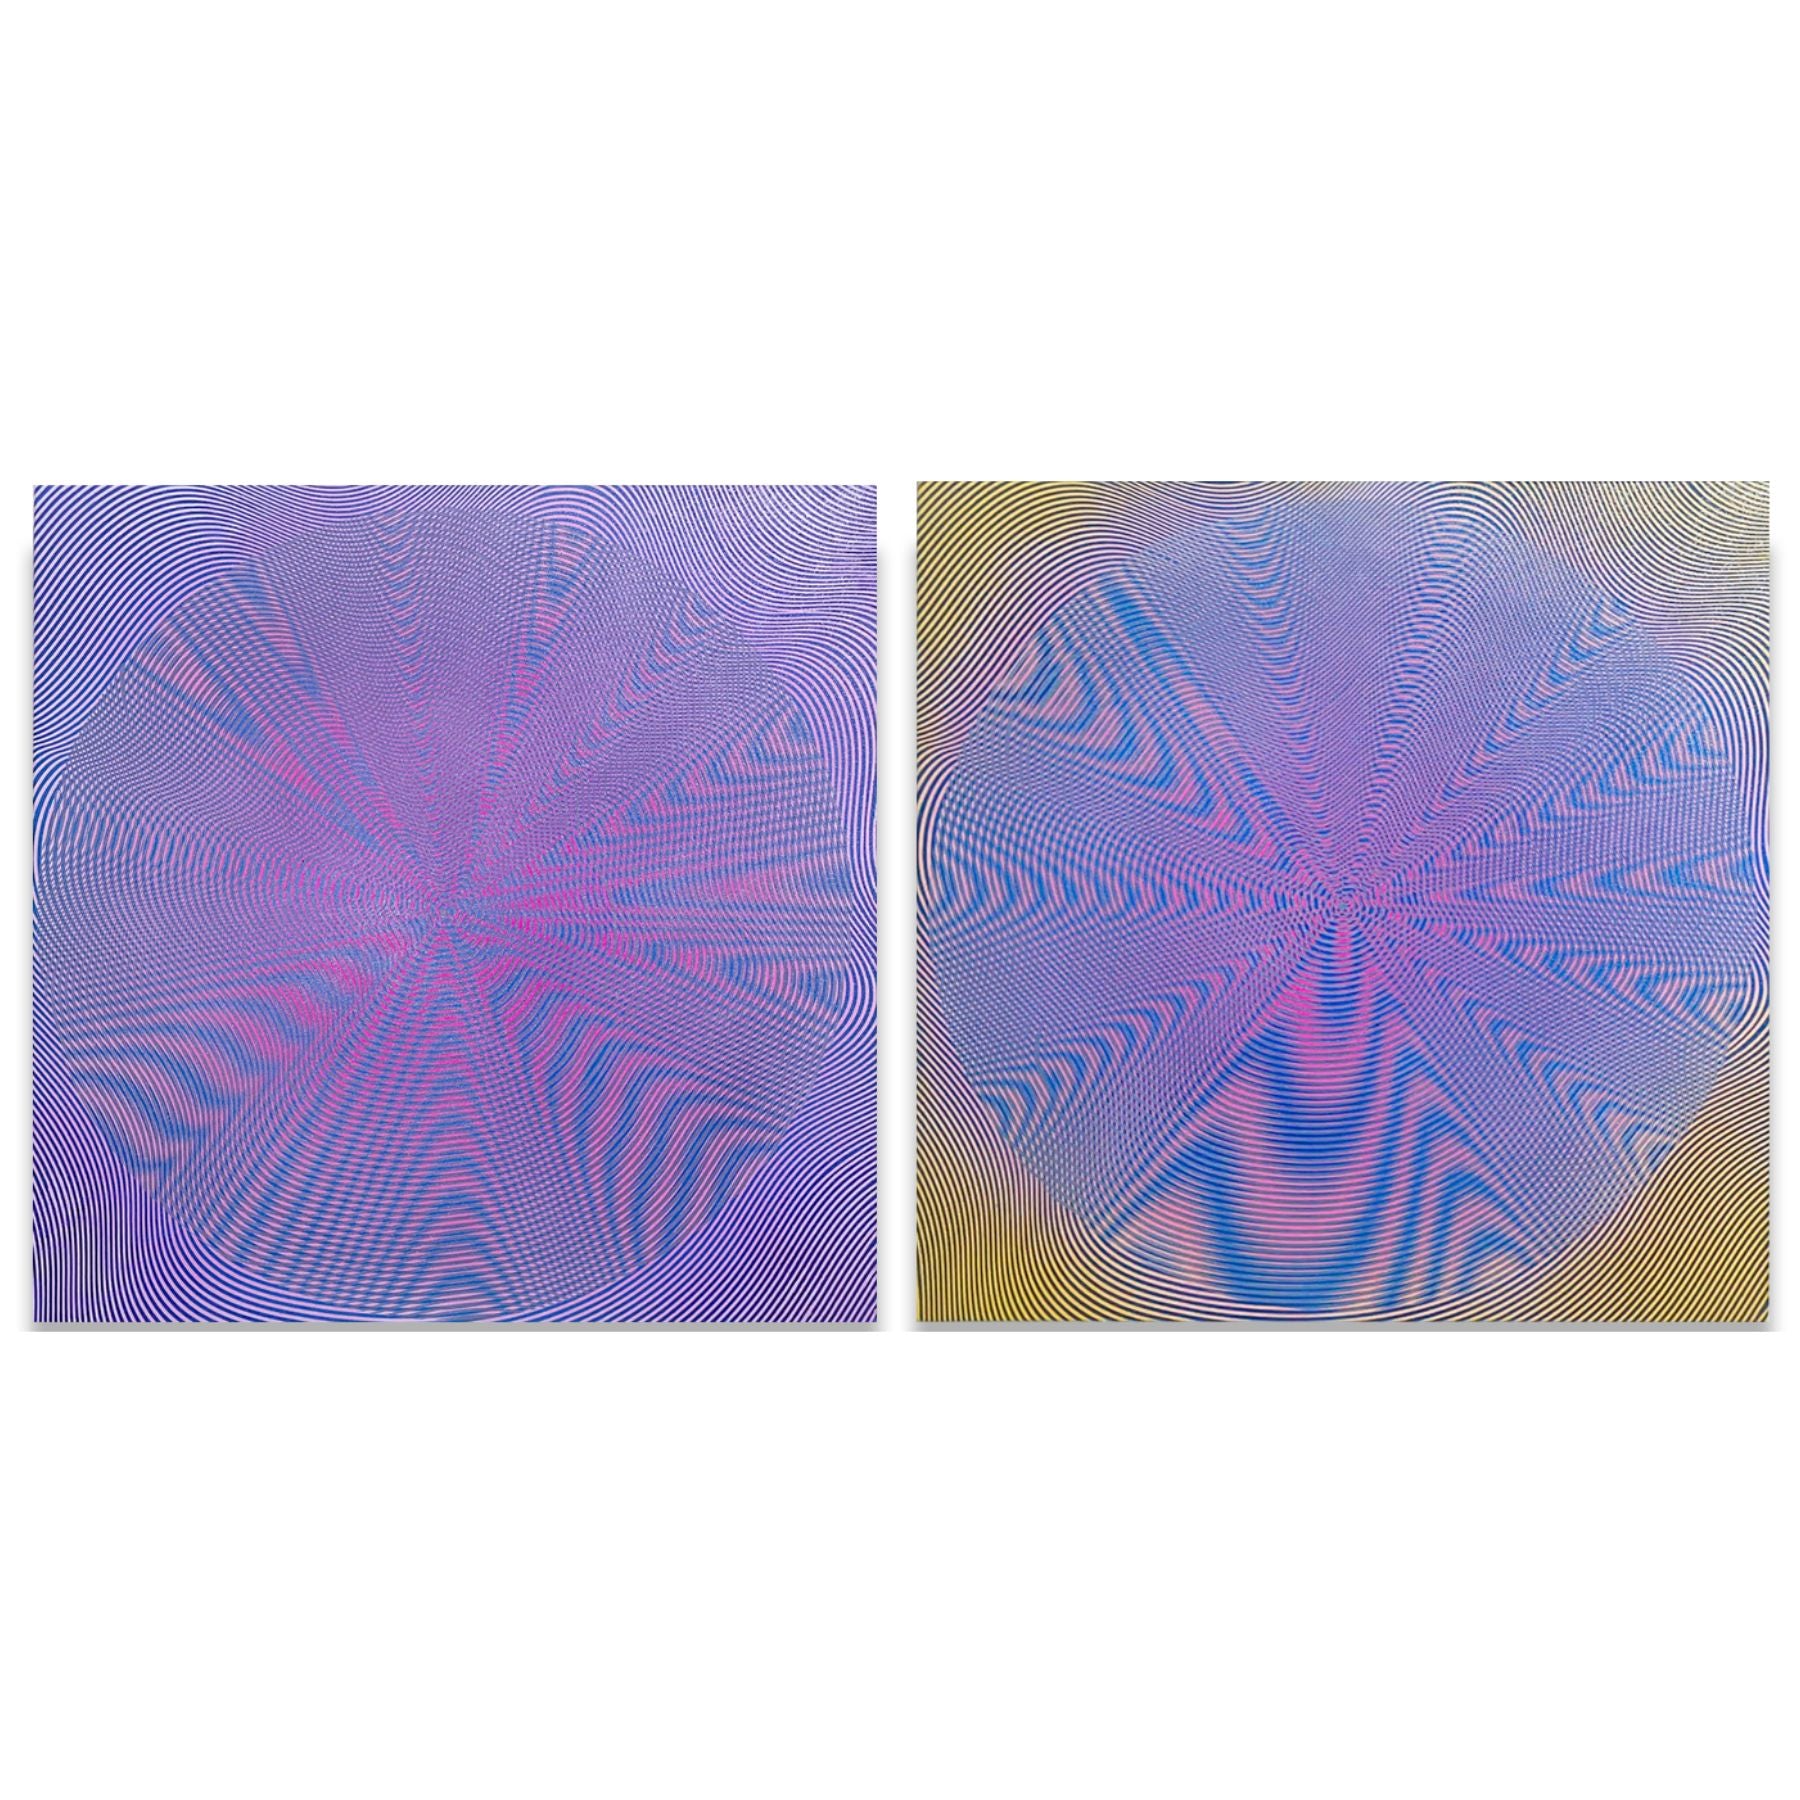 Through Rose Coloured Glasses (Diptych) by Ashna Malik